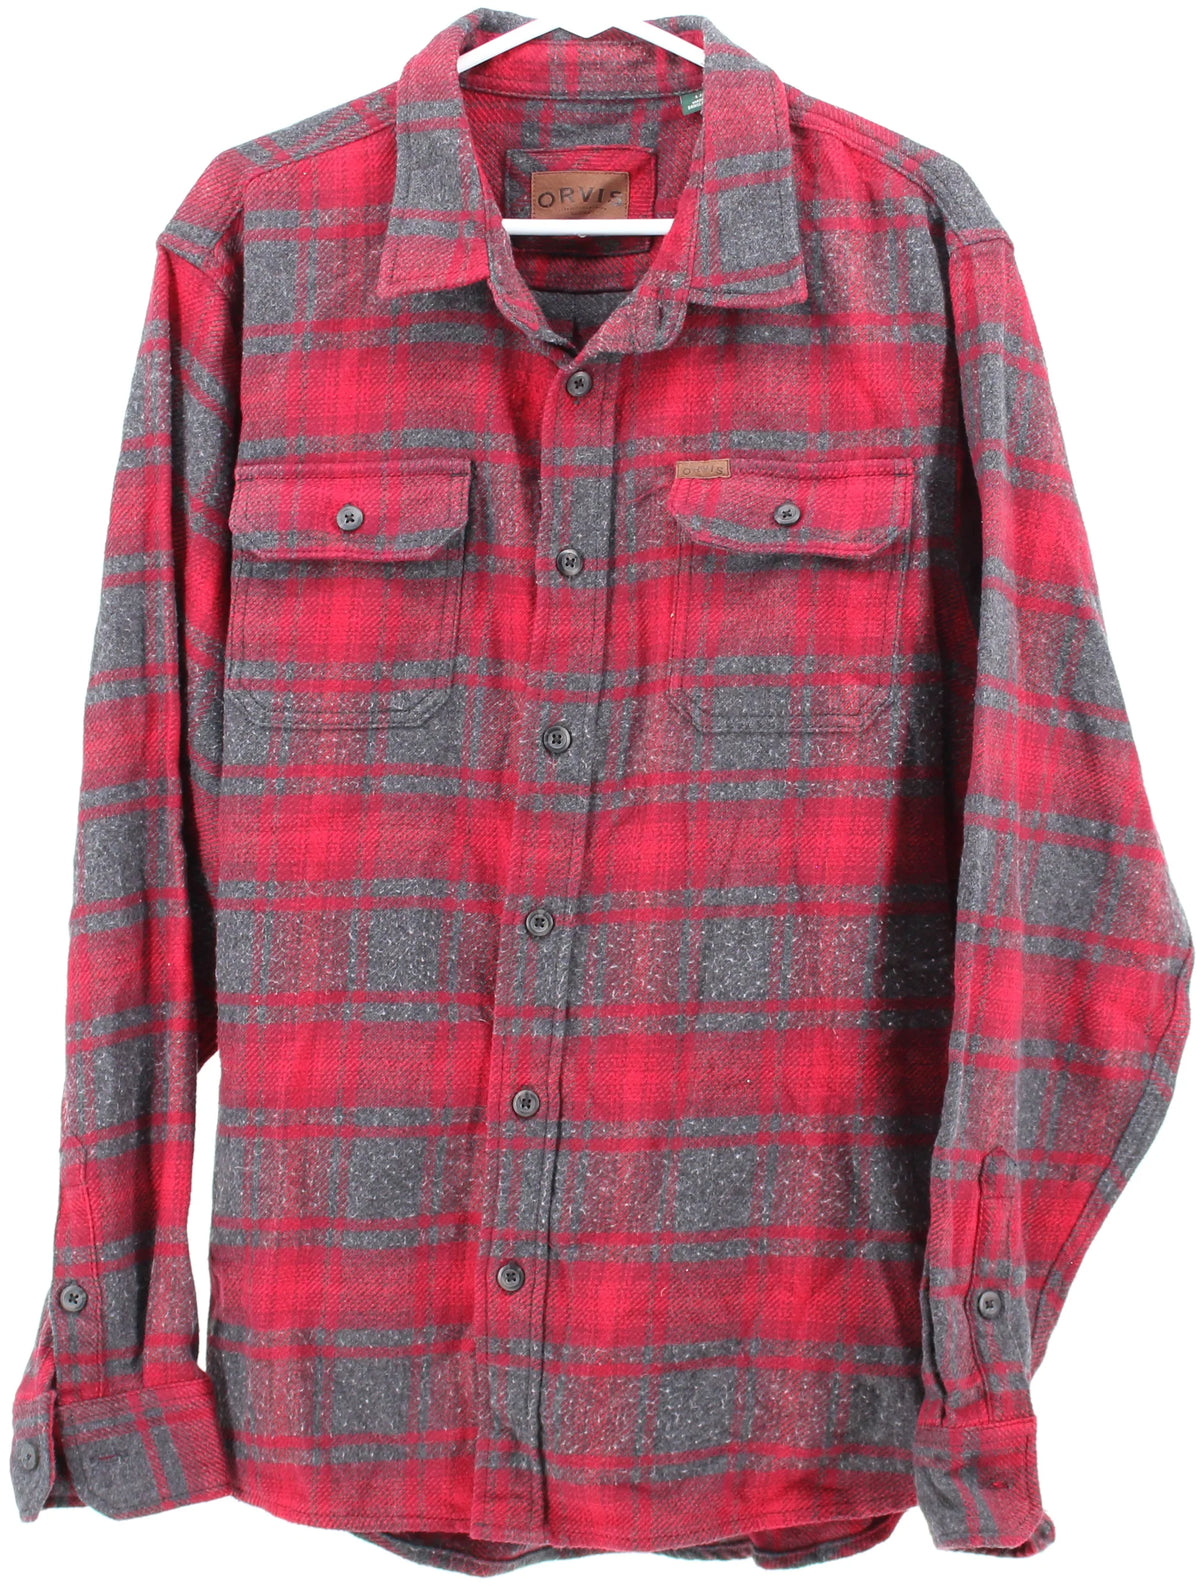 Orvis Red and Grey Plaid Flannel Shirt